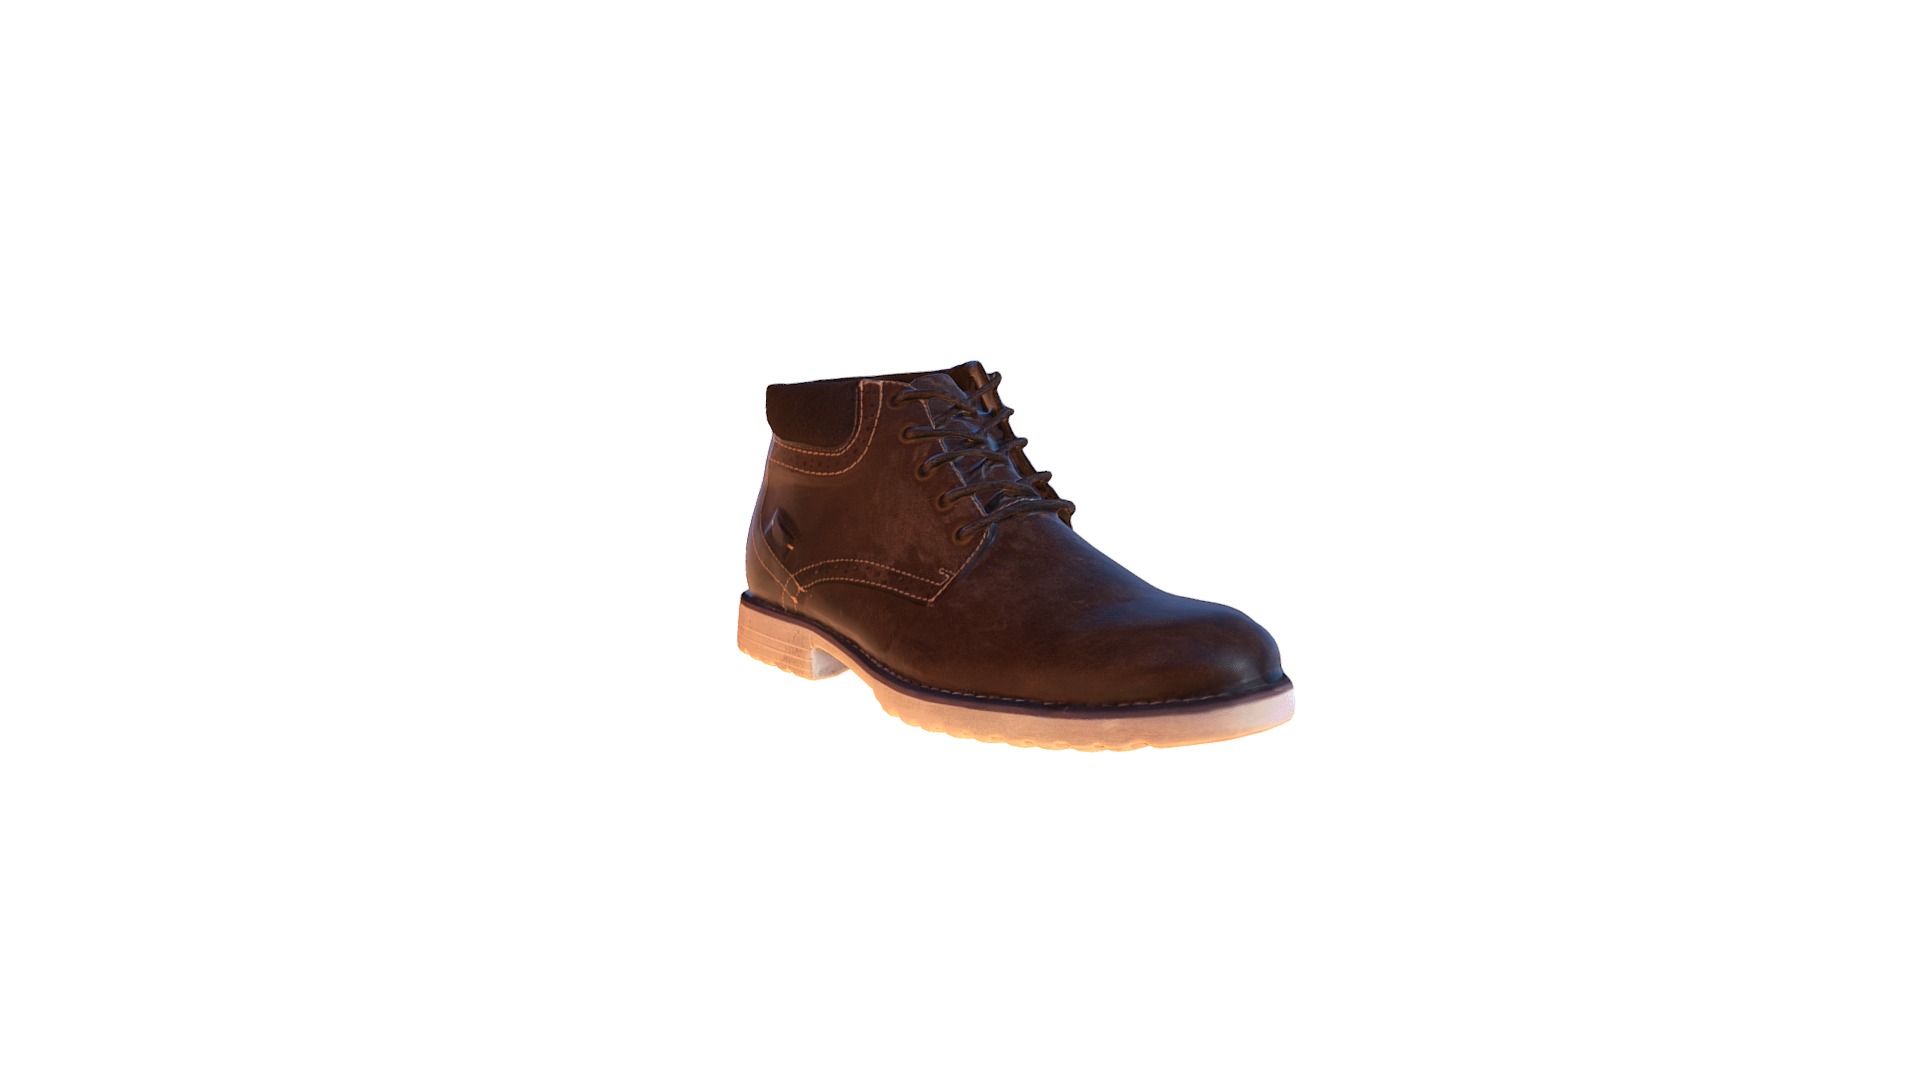 3D model Fagus Shoe - This is a 3D model of the Fagus Shoe. The 3D model is about a brown shoe on a white background.